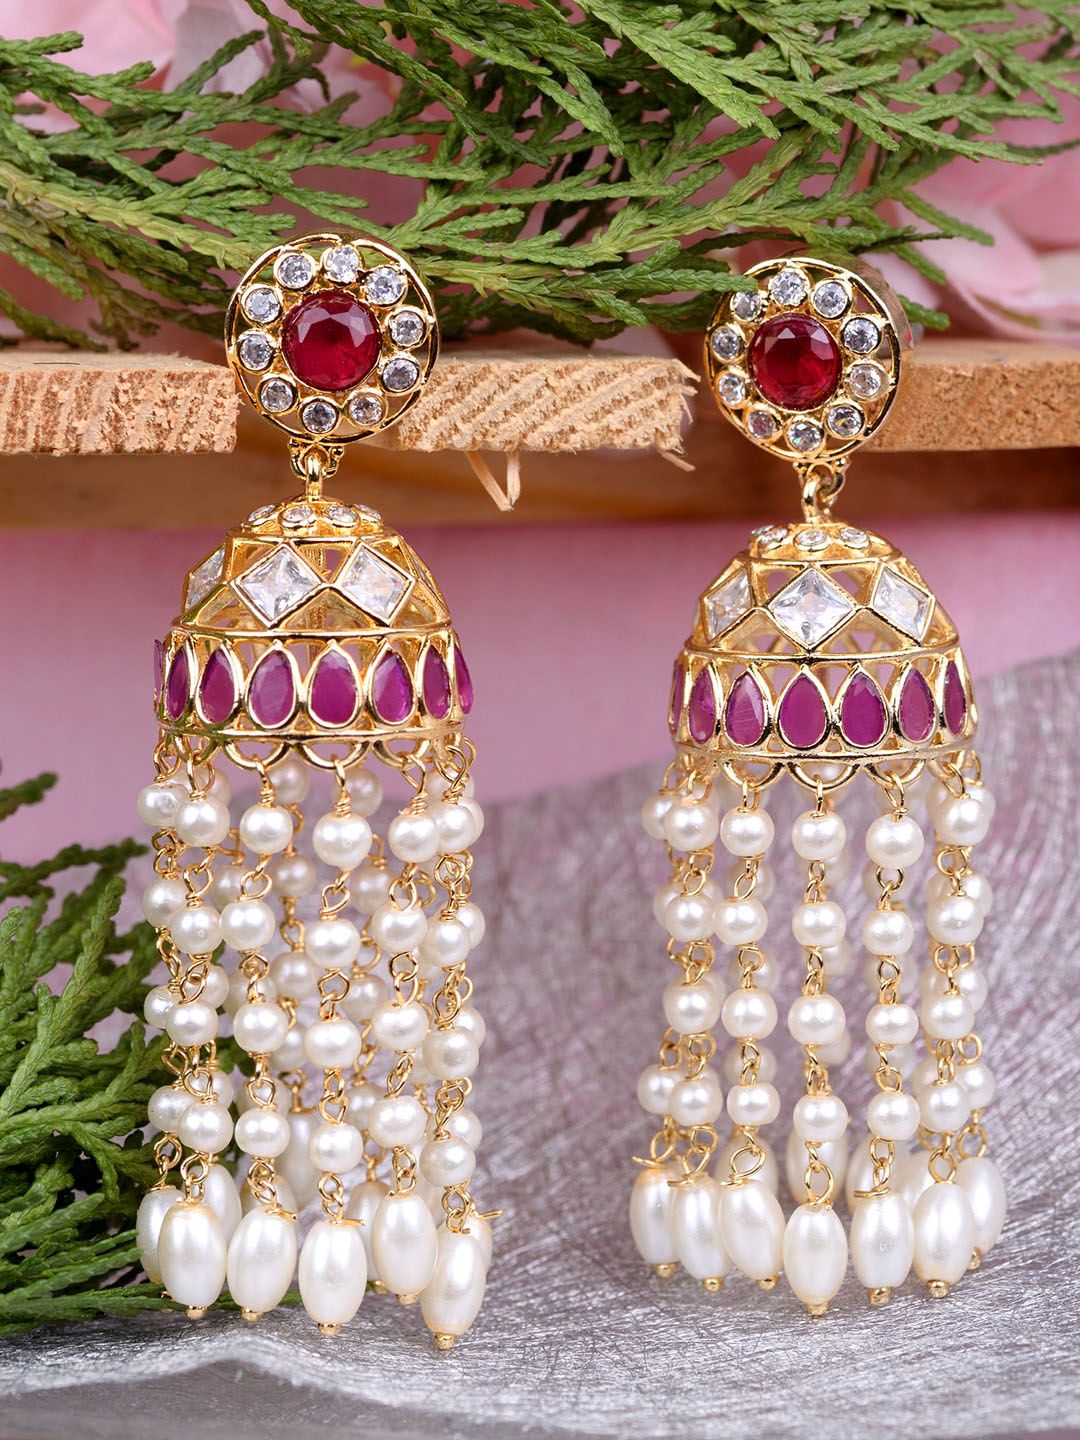 Saraf RS Jewellery Gold-Toned & Red Gold-Plated AD studded Pearl Jhumkas Earrings Price in India